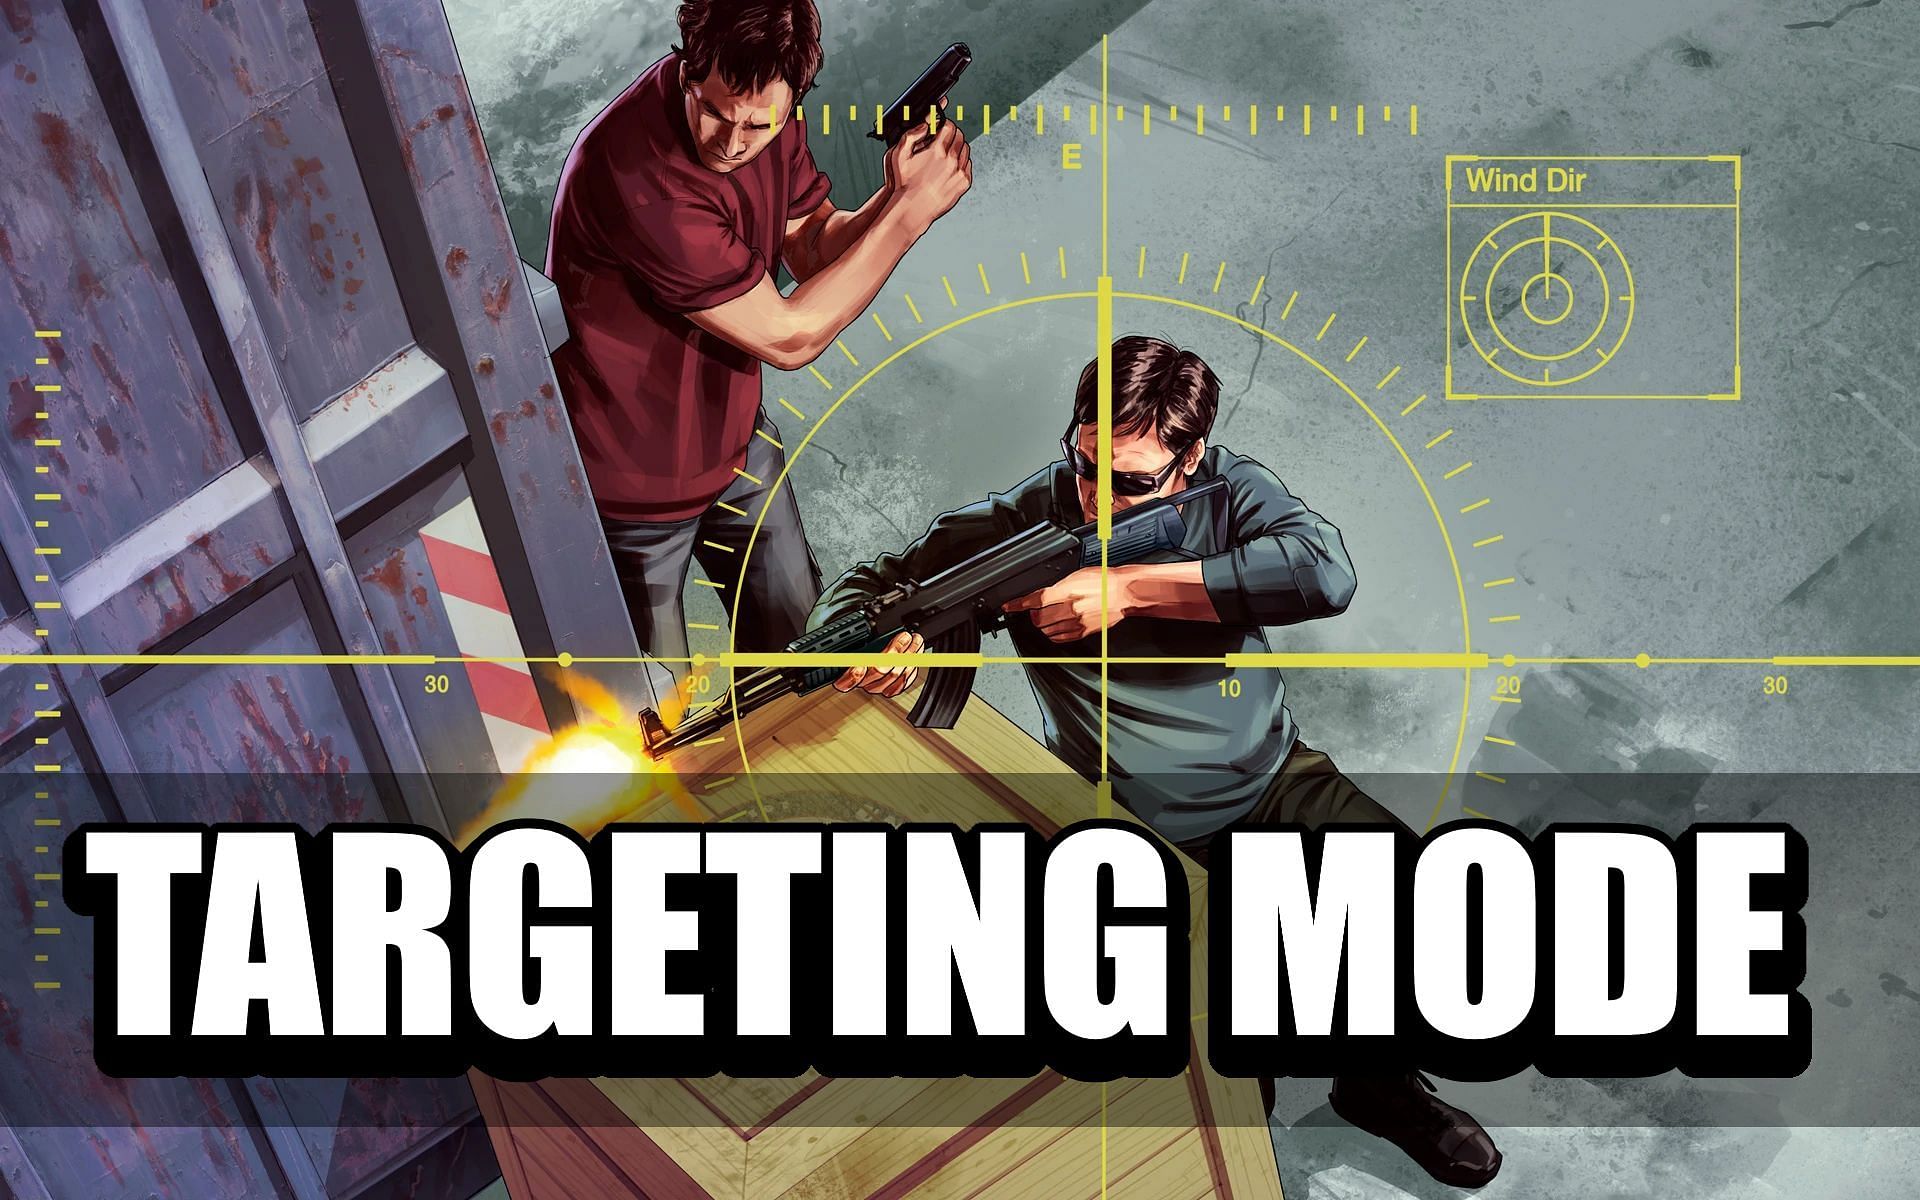 GTA Online players can&#039;t change their Targeting Mode unless they&#039;re in GTA 5 (Image via Rockstar Games)